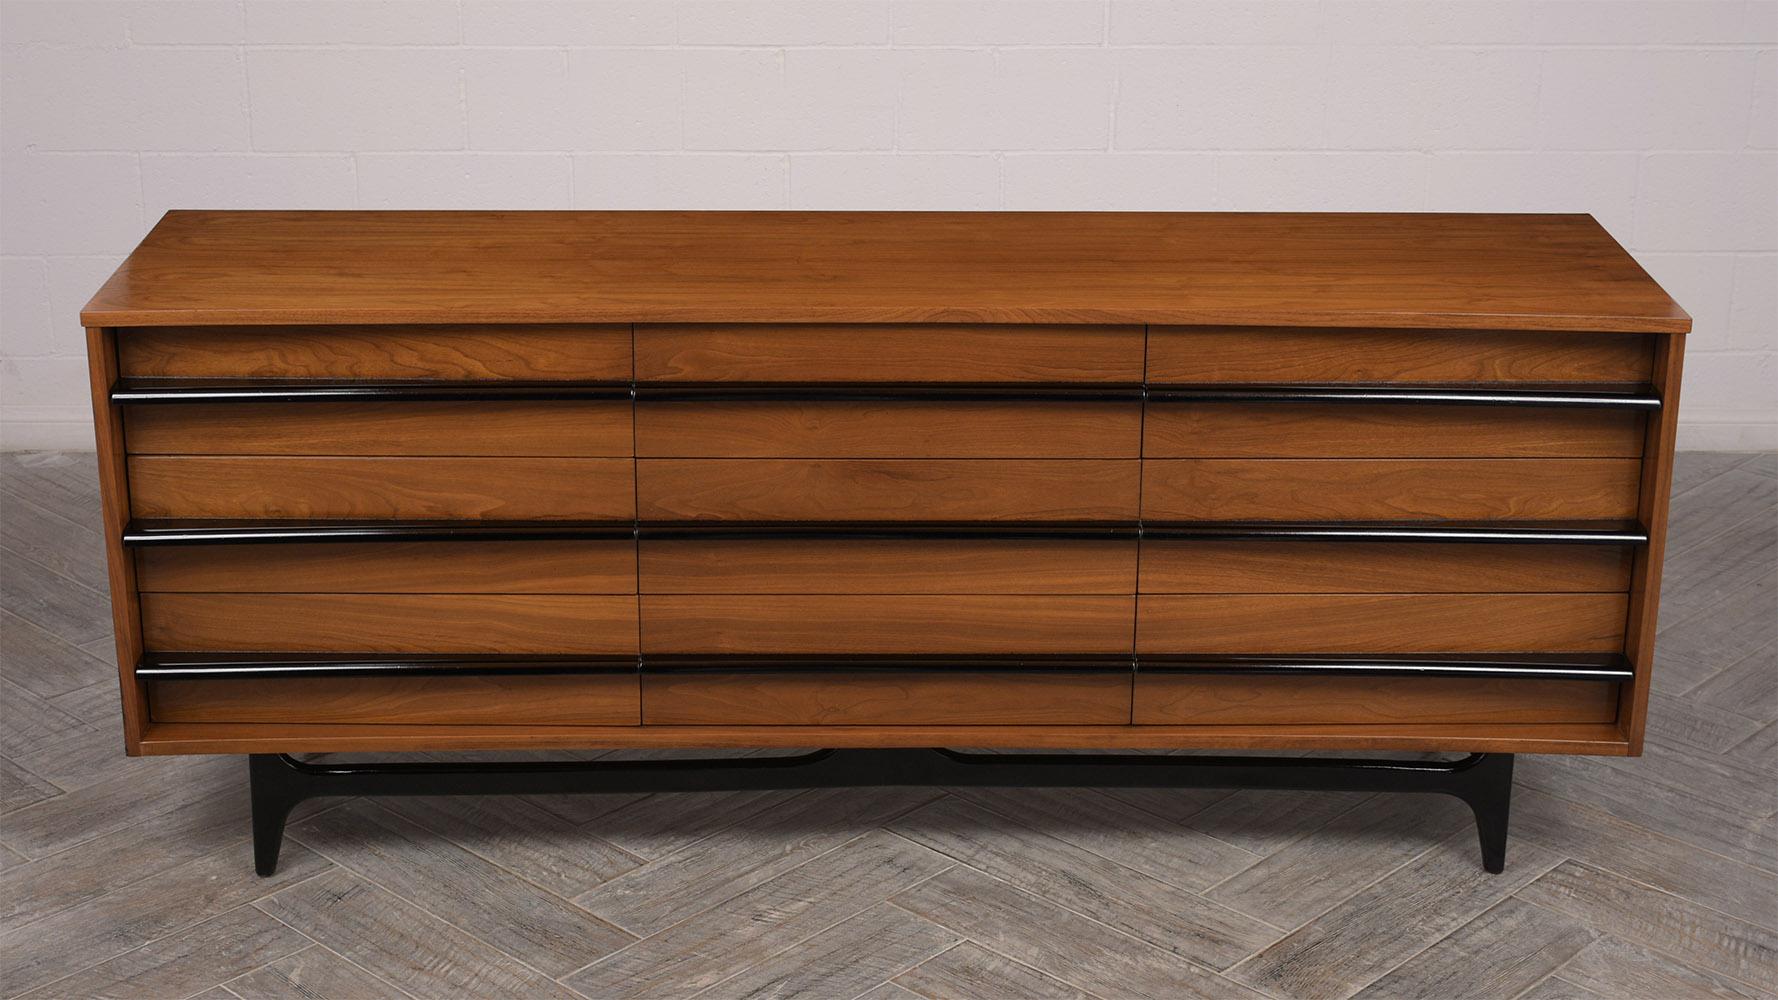 This is a unique dresser in the style of American designer Vladimir Kagan. Made from solid walnut wood, stained in a light walnut color. Features clean lines with a unique front curved design. Has nine drawers with black color handles. Top right